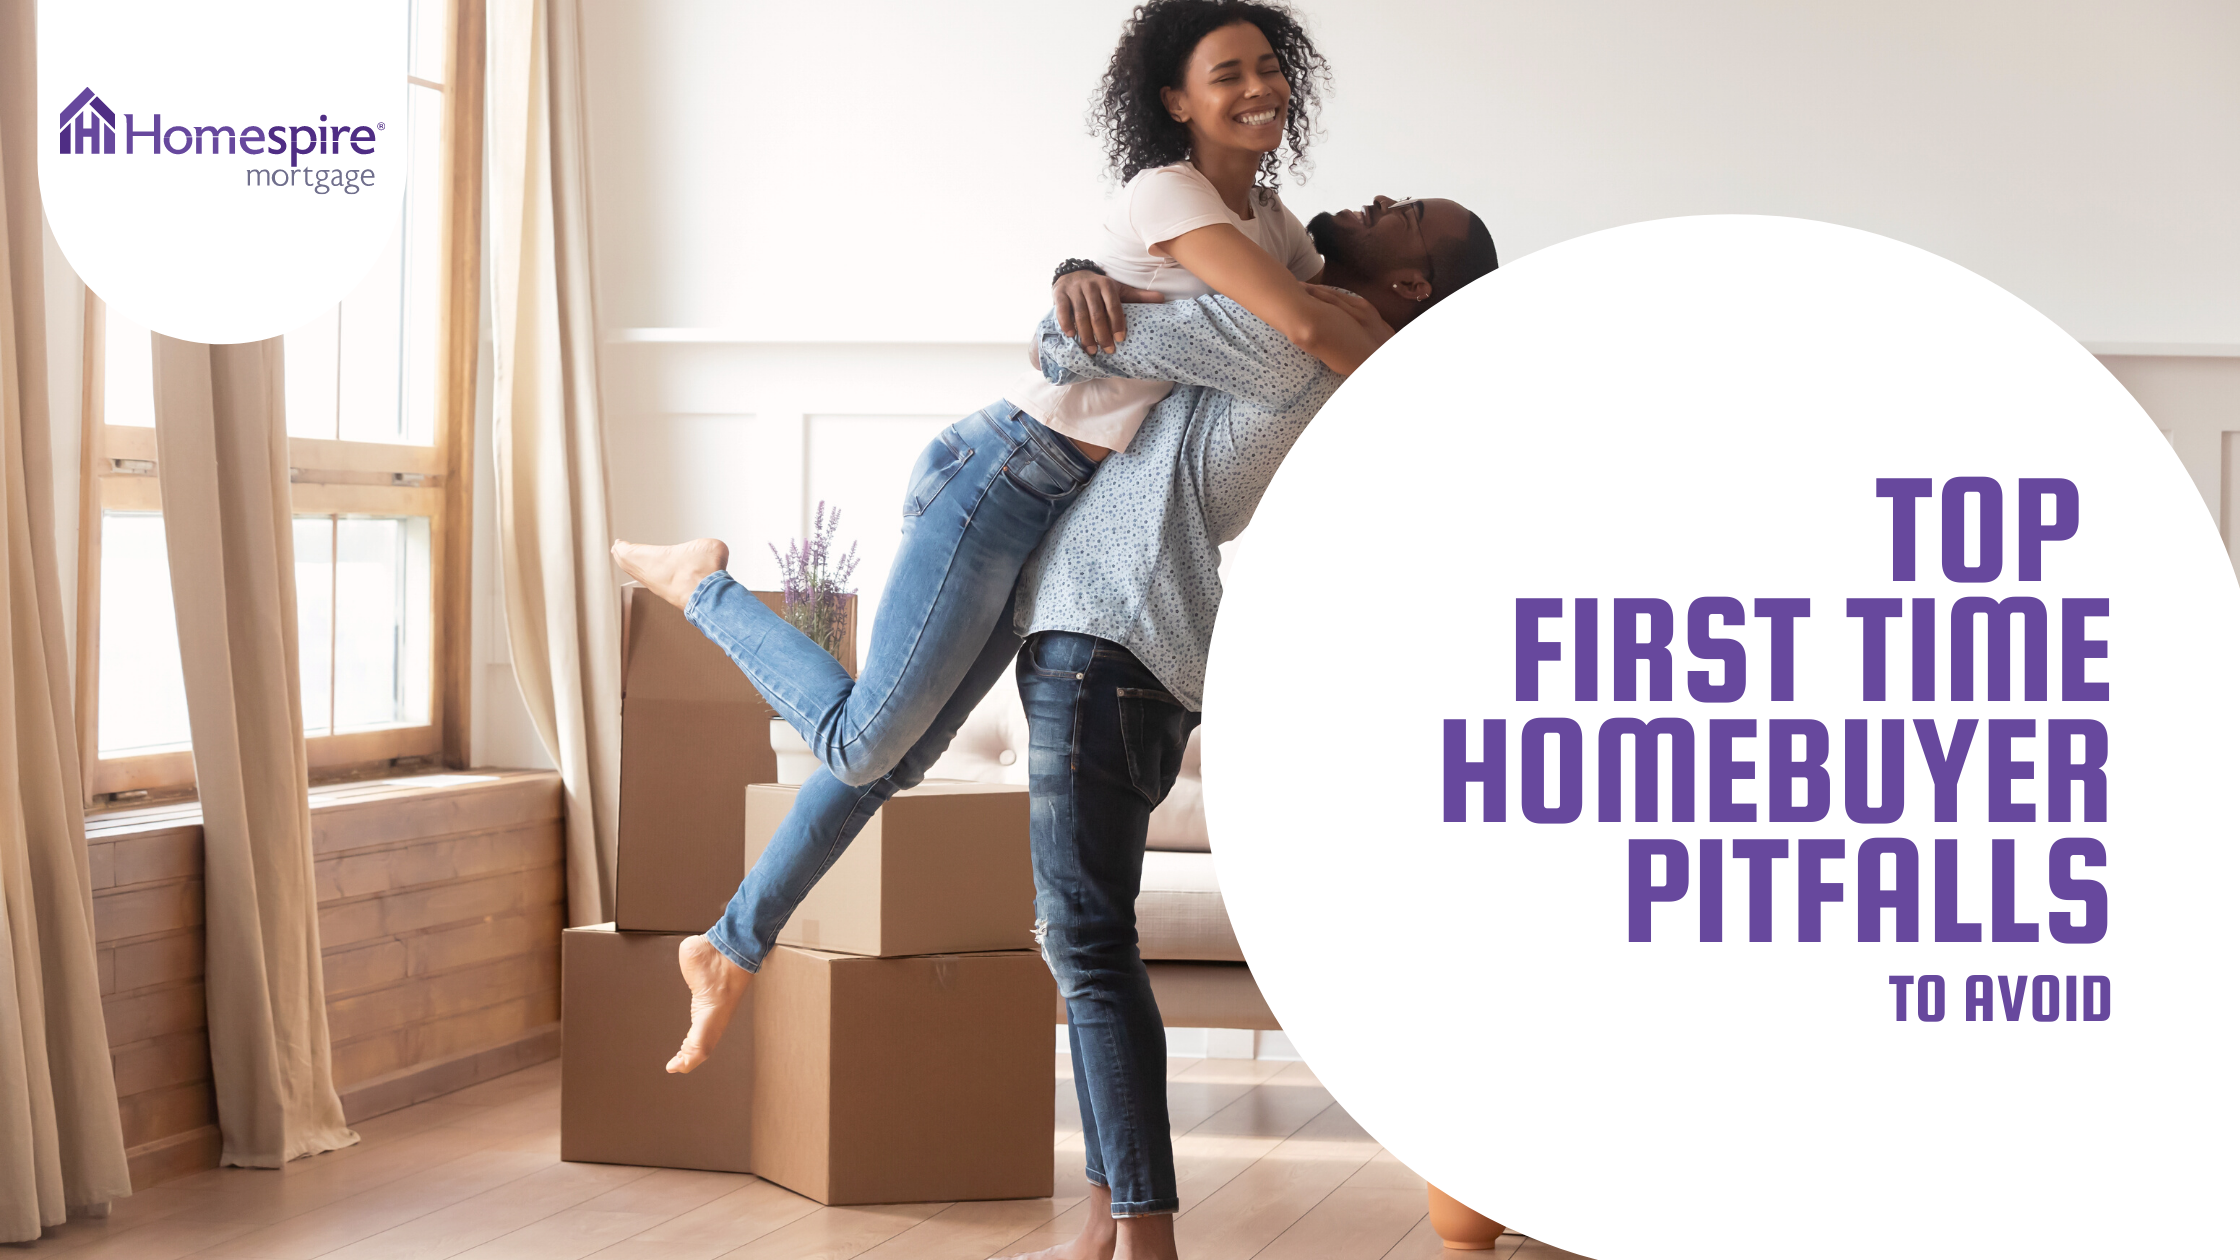 Mortgage Team - Top First Time Homebuyer Pitfalls to Avoid